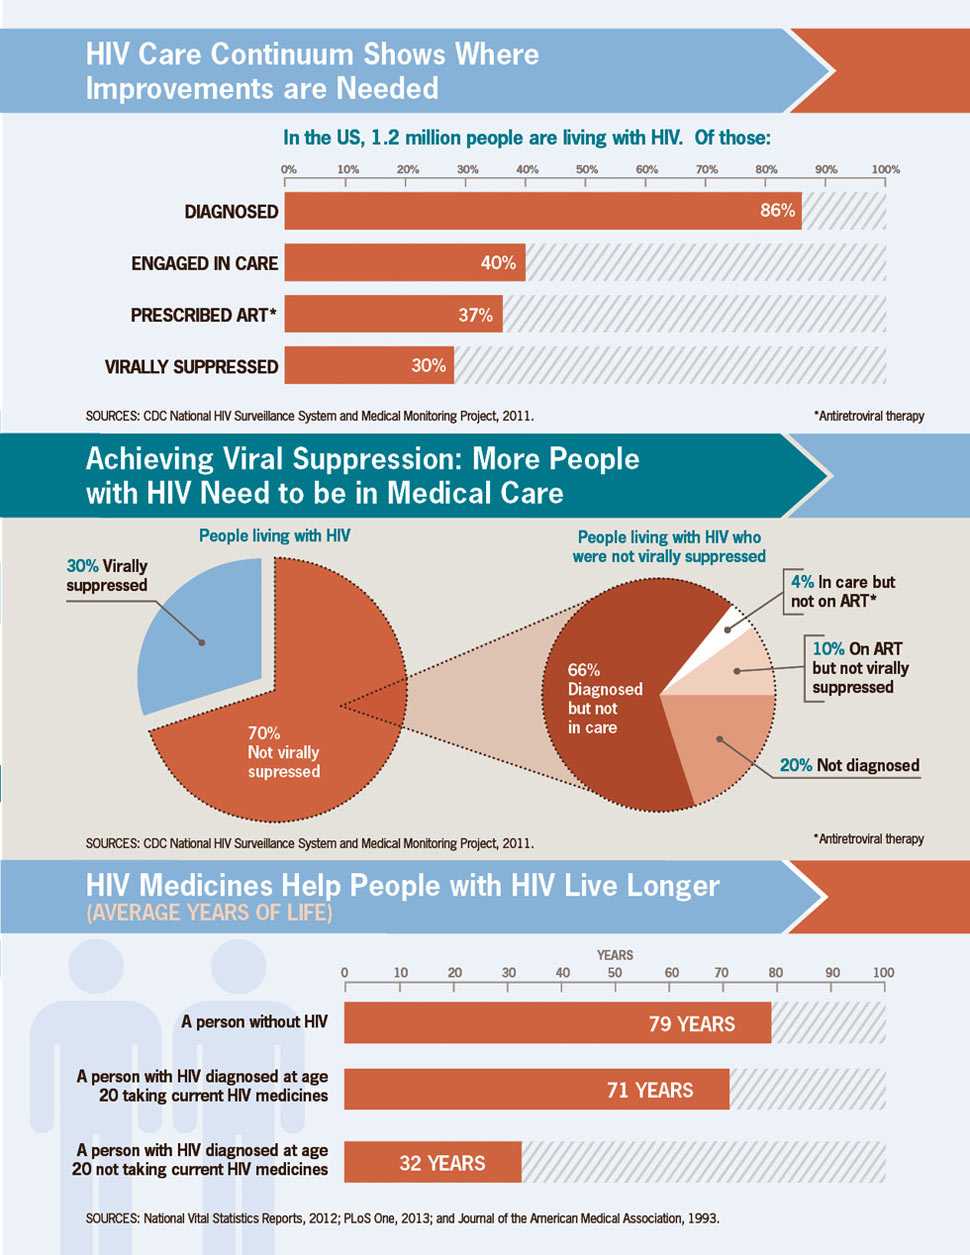 HIV Care Continuum Shows Where Improvements are Needed. 